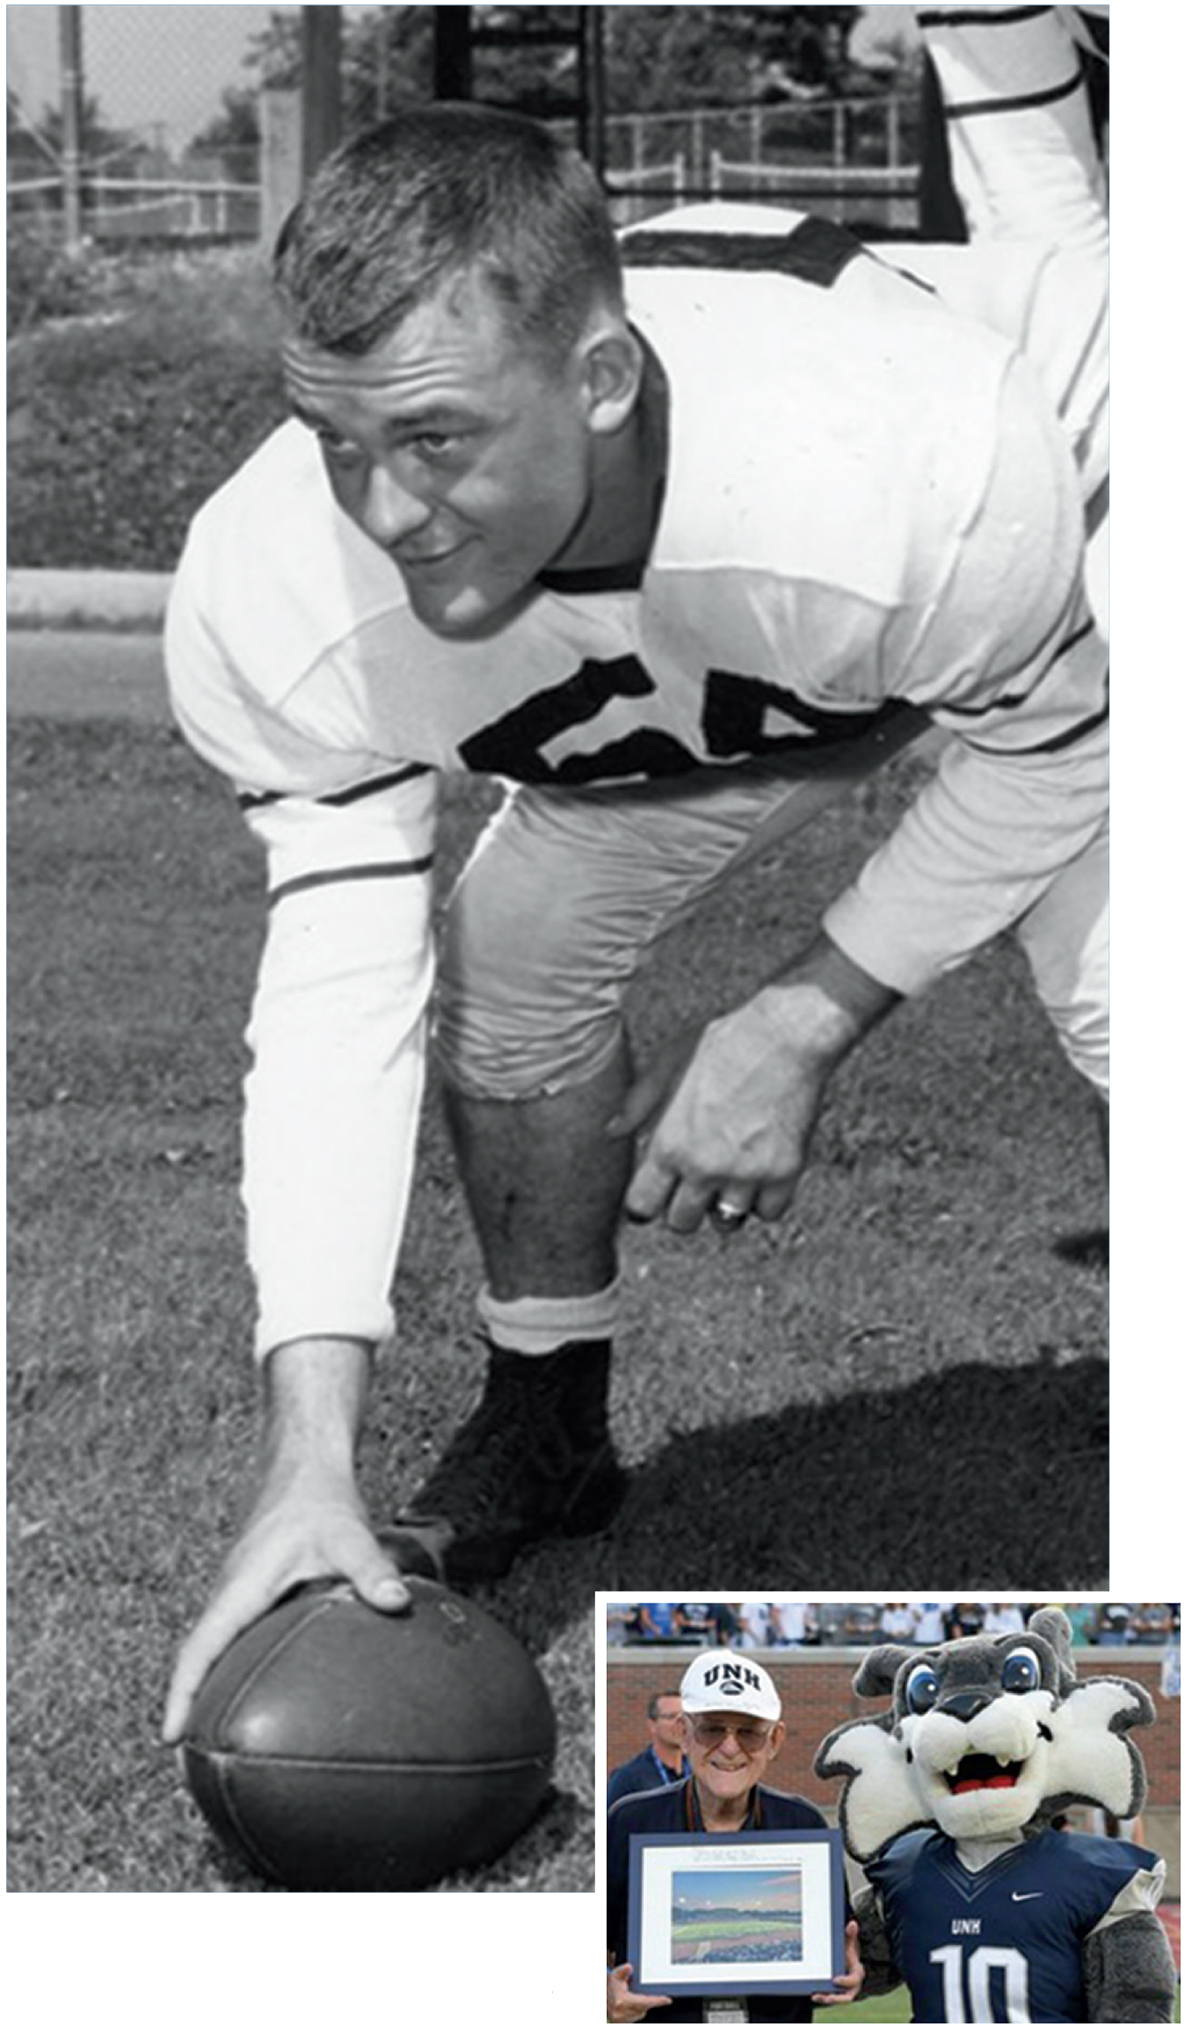 A two image collage structure (left and right side) in which the tallest, portrait (left side) black and white photograph shows Norris Browne '55 in a downward crouched position getting ready to hike the football as a center for the UNH team and the shorter, smaller (right side) landscape photograph shows Norris Browne in Sept. 2021 being honored as Donor of the Game for his steadfast support of both athletics and academics at his alma mater smiling and posing for a picture with a picture frame in his hands next to the UNH football team mascot